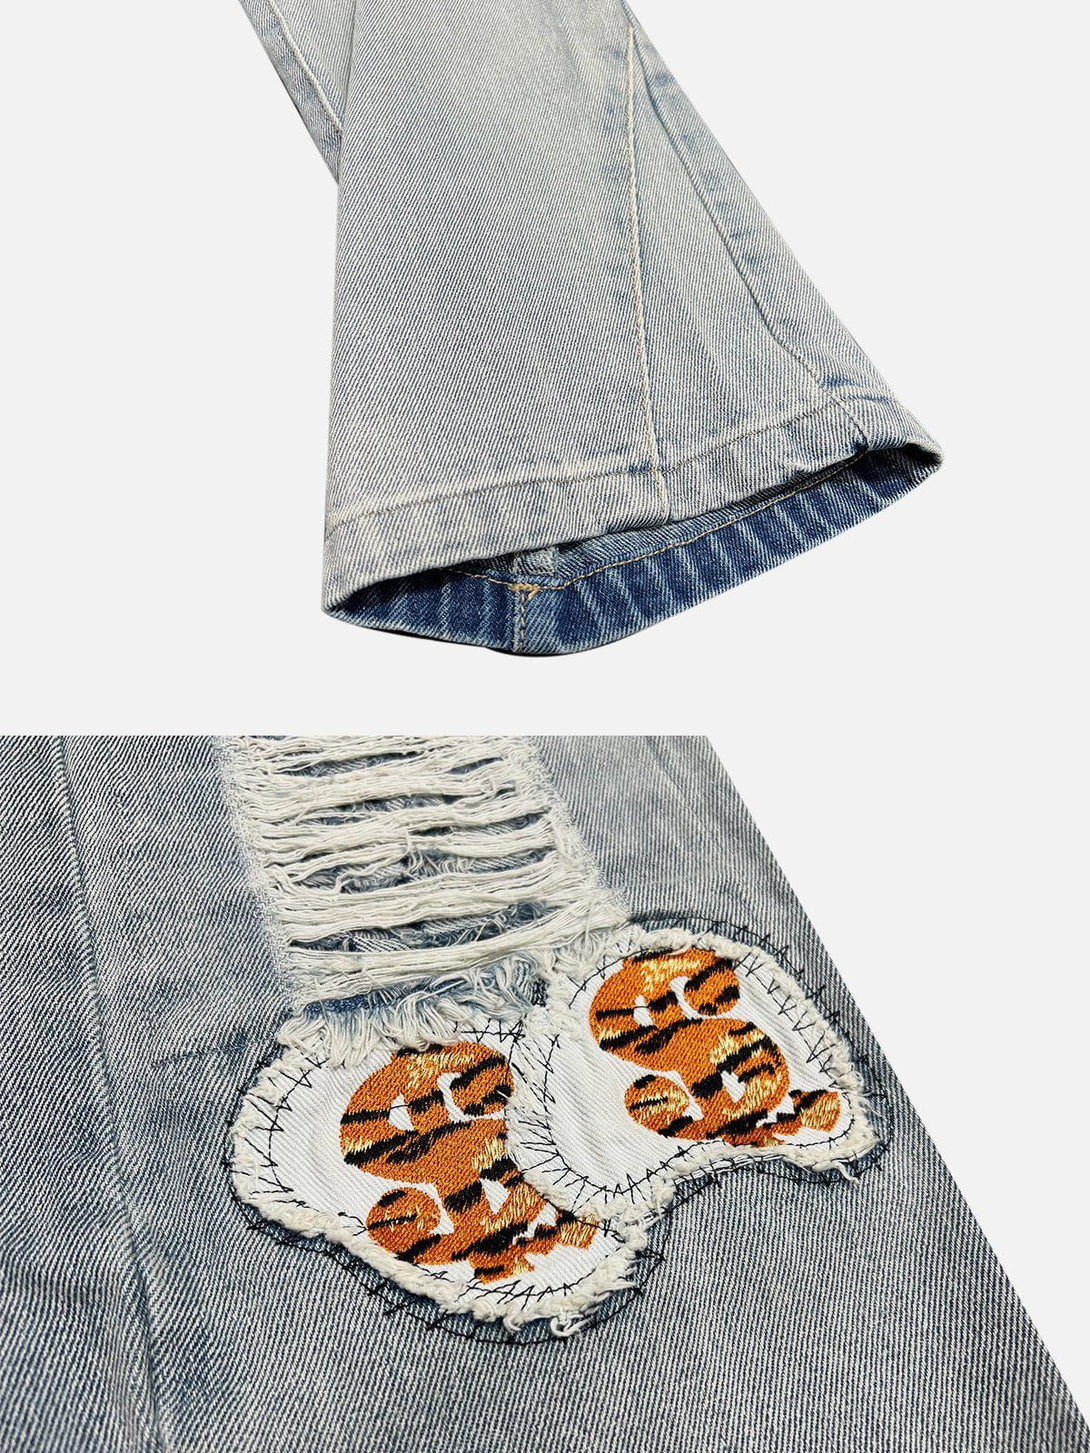 Majesda® - Letter Embroidery Holes Jeans outfit ideas streetwear fashion